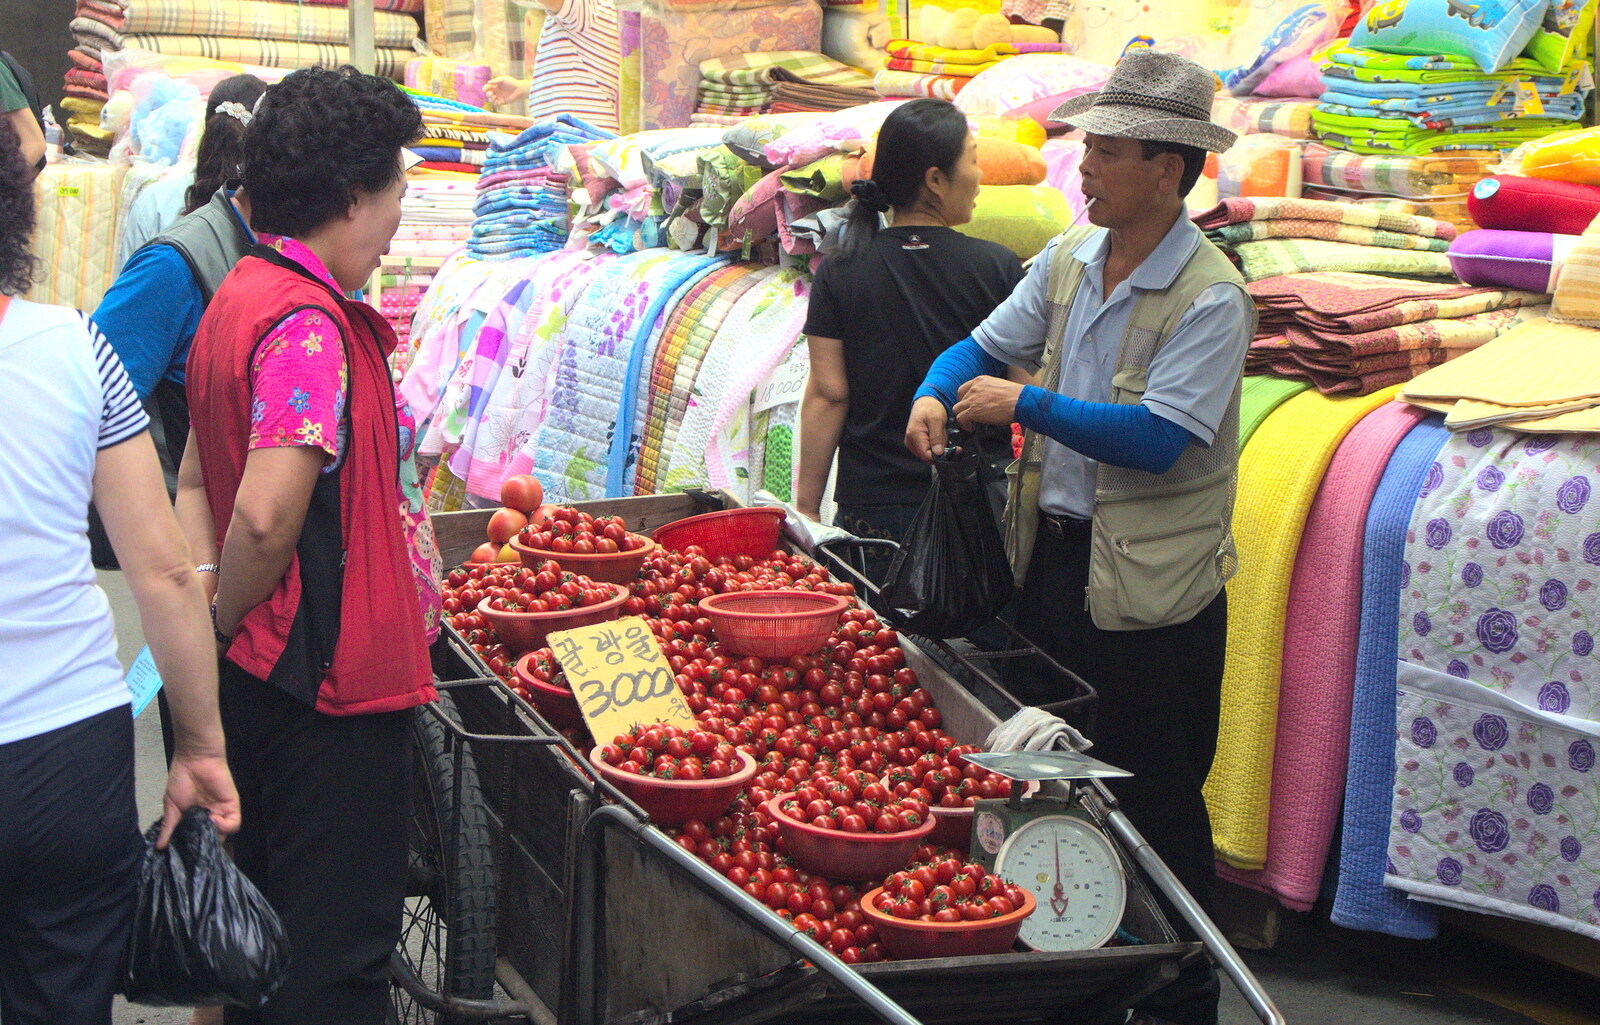 A tomato seller in action from Seomun Market, Daegu, South Korea - 1st July 2012